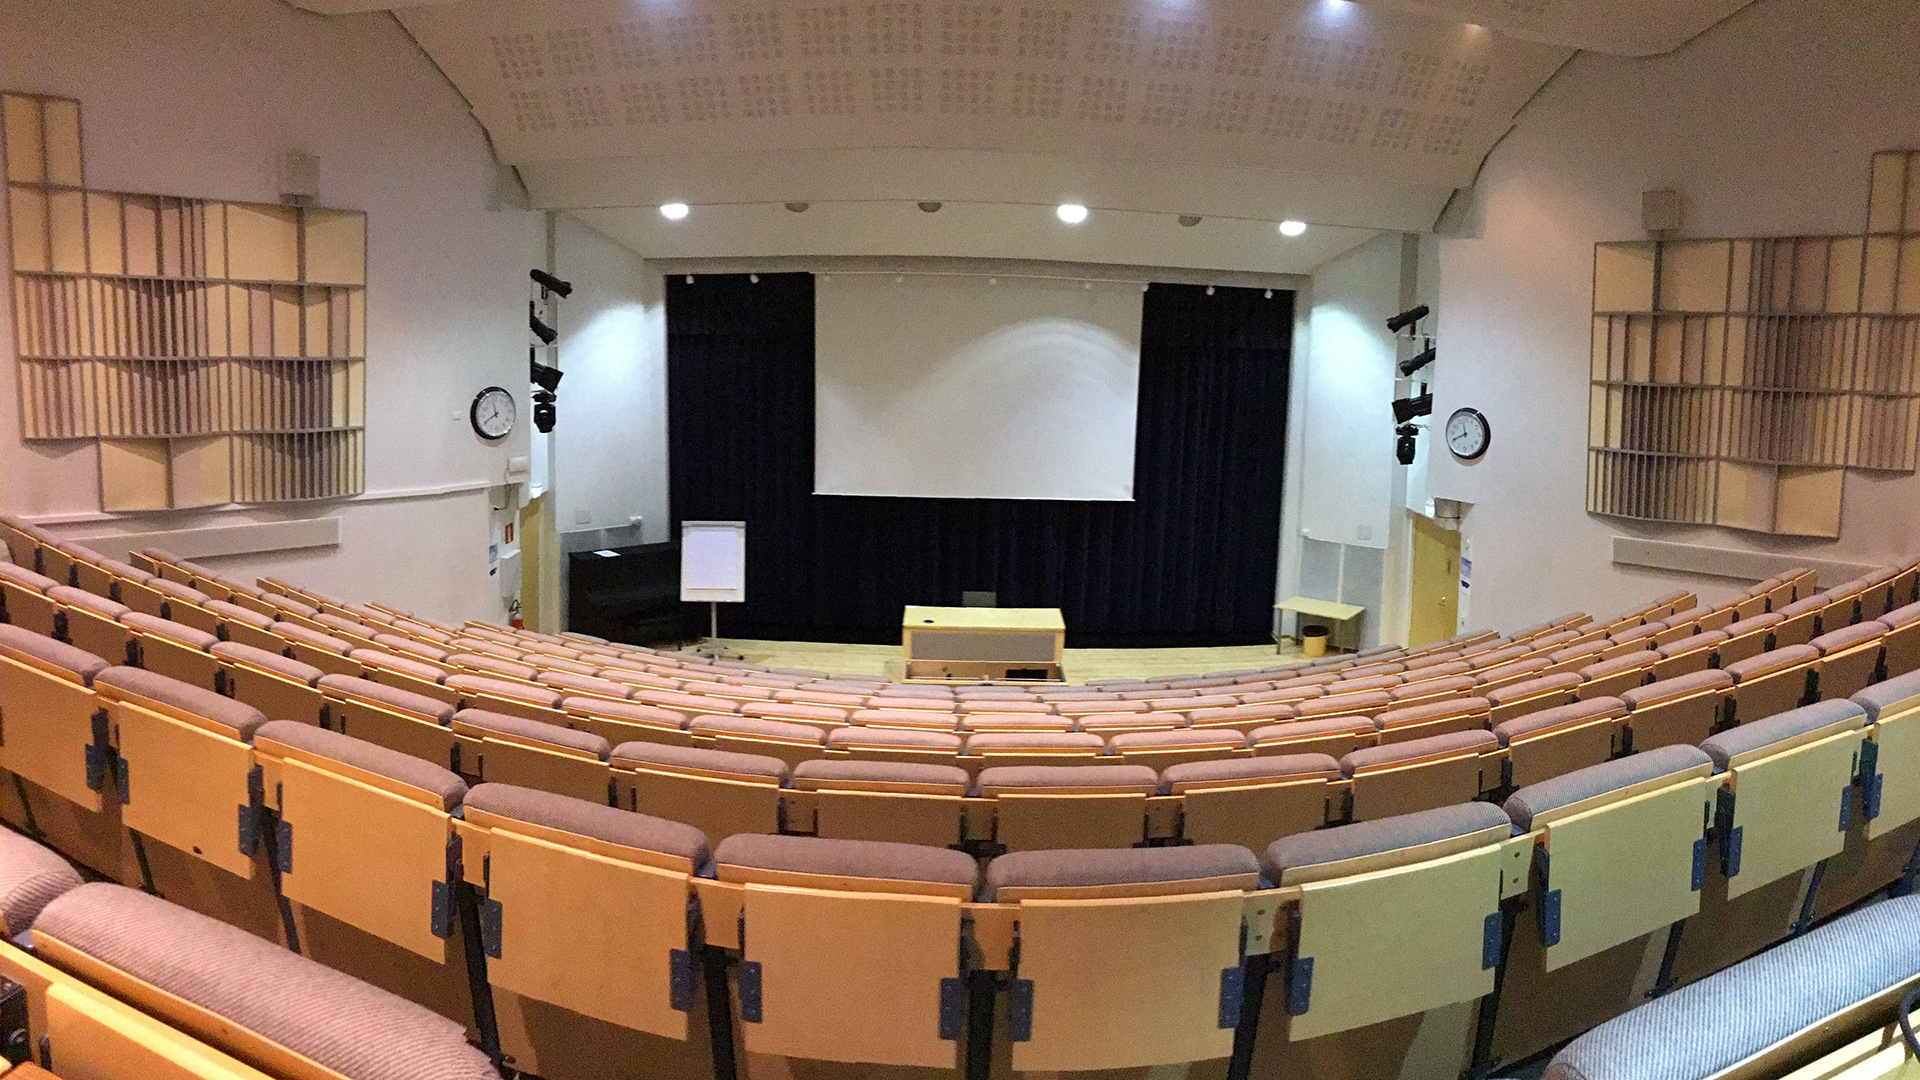 The facilities include a 180-person auditorium with great acoustics and a 300 m2 sports hall. Catering and accommodation services for individuals and groups are also available.